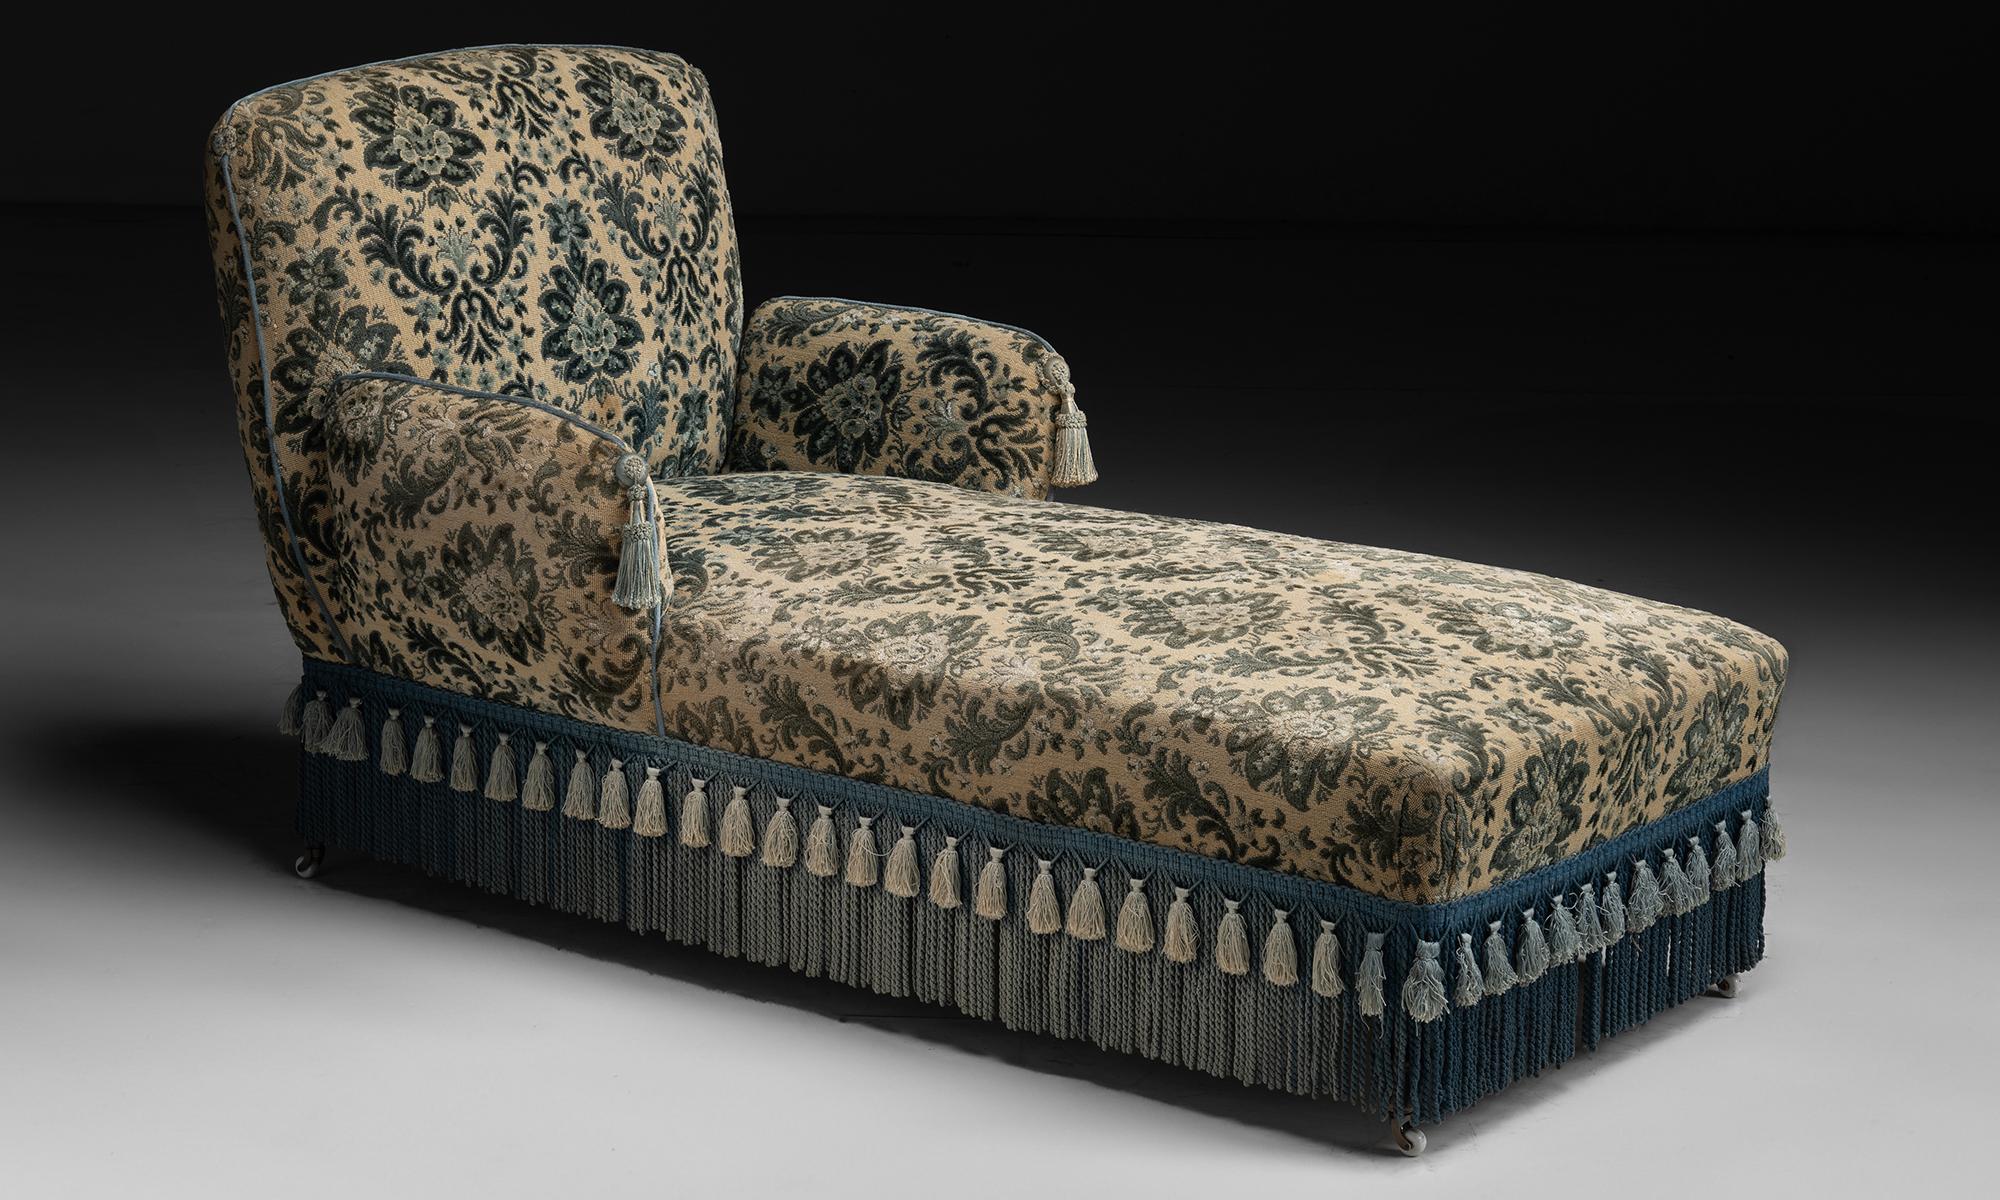 Chaise Lounge in Jacquard Fabric

France Circa 1910

In Original Blue / Ivory Jacquard with fringed tassels.

32”w x 59”d x 33”h x 16”seat